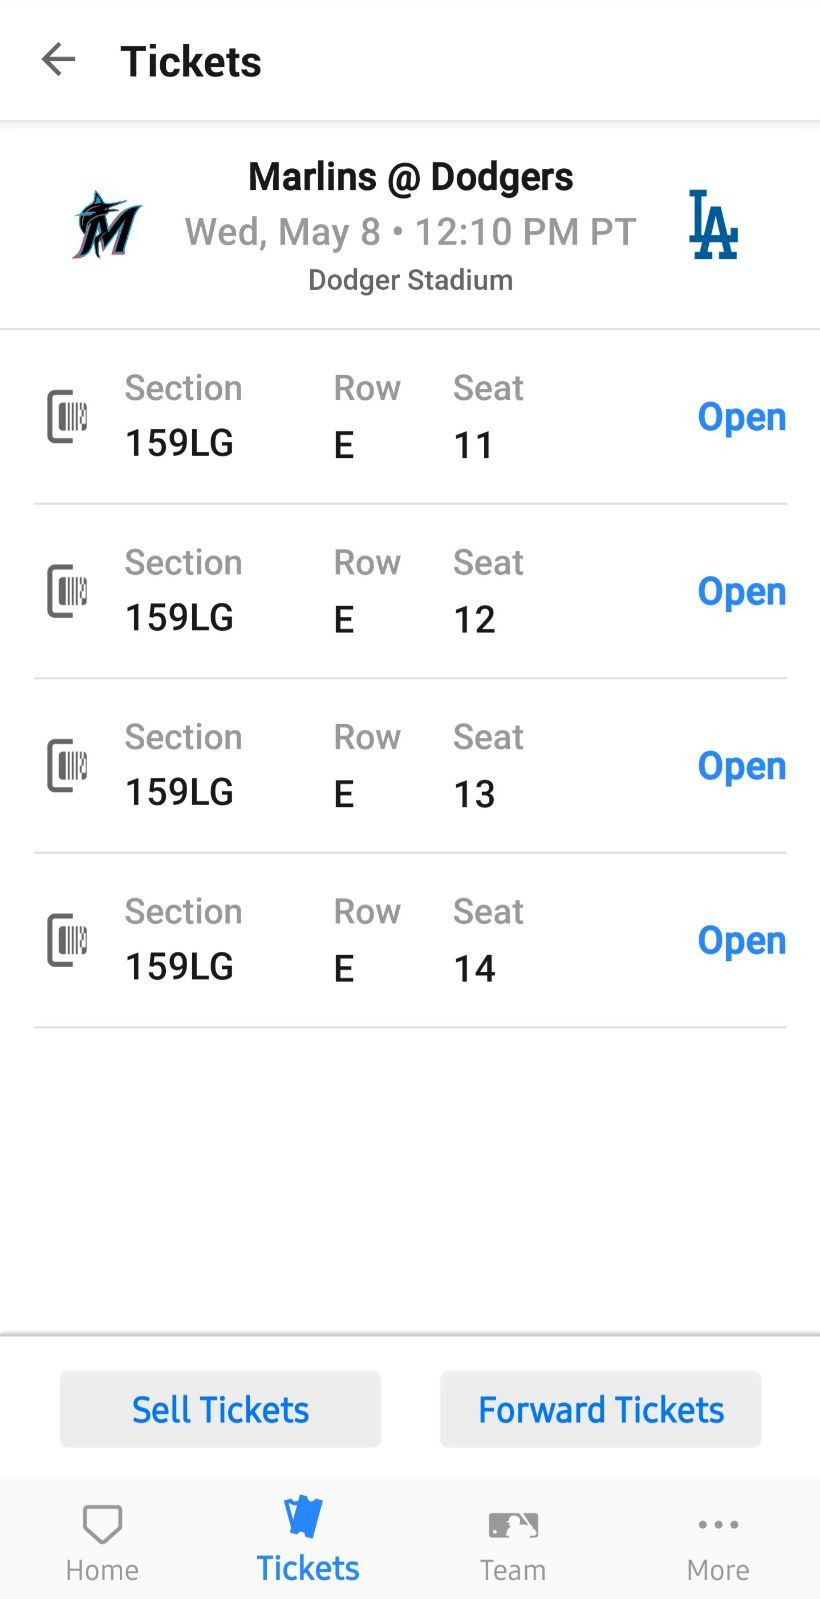 4 Dodgers vs Marlins Game Tickets